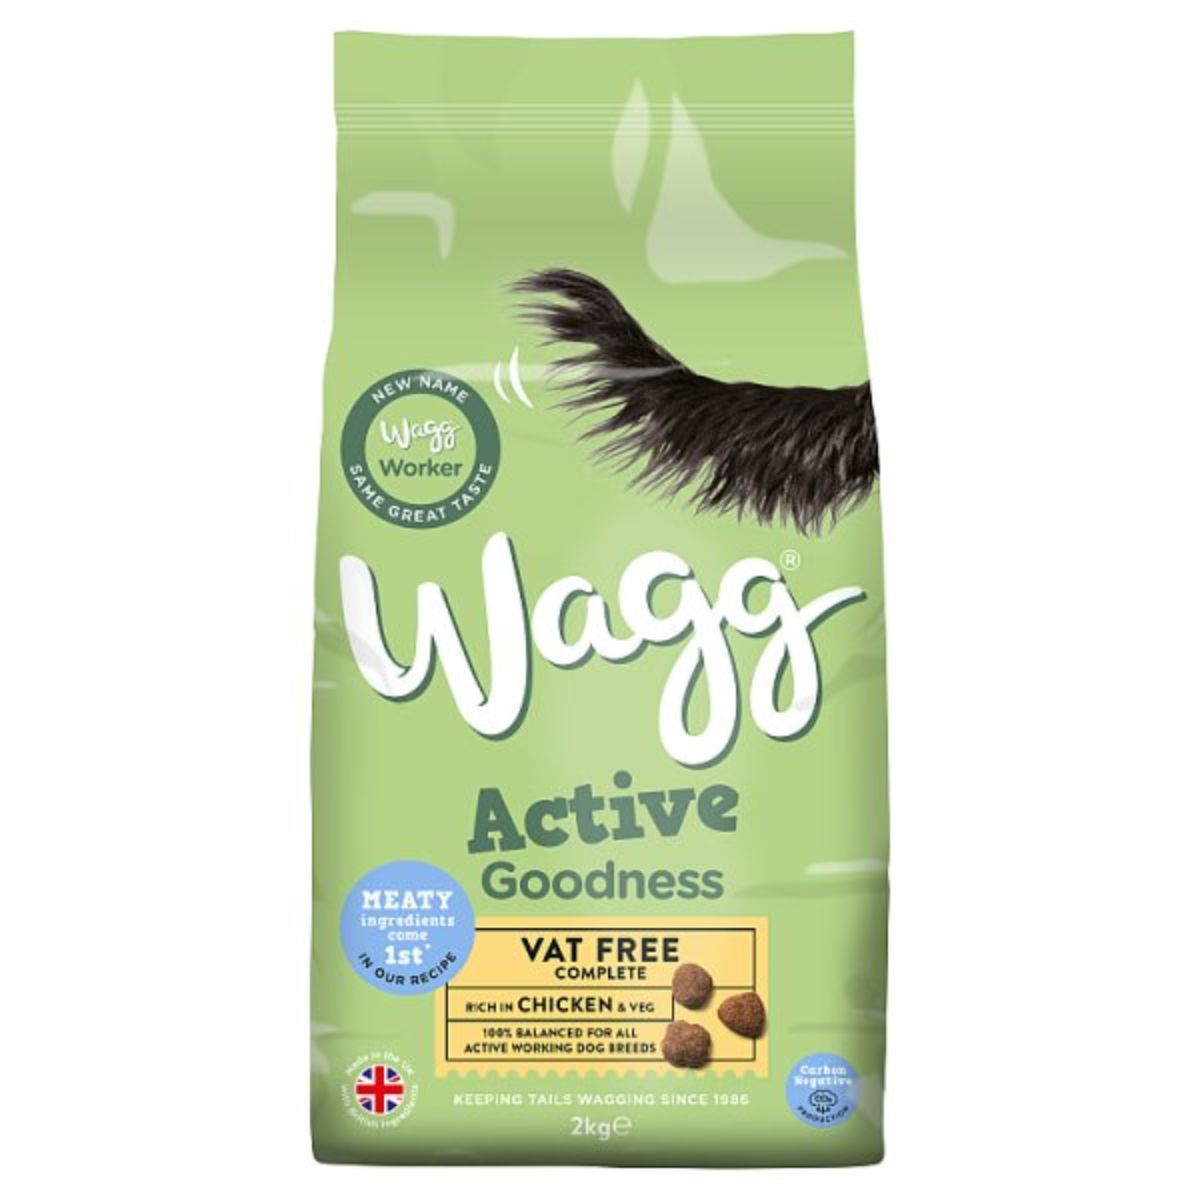 Wagg - Active Goodness Rich in Chicken & Vegetable - 2kg dog food.